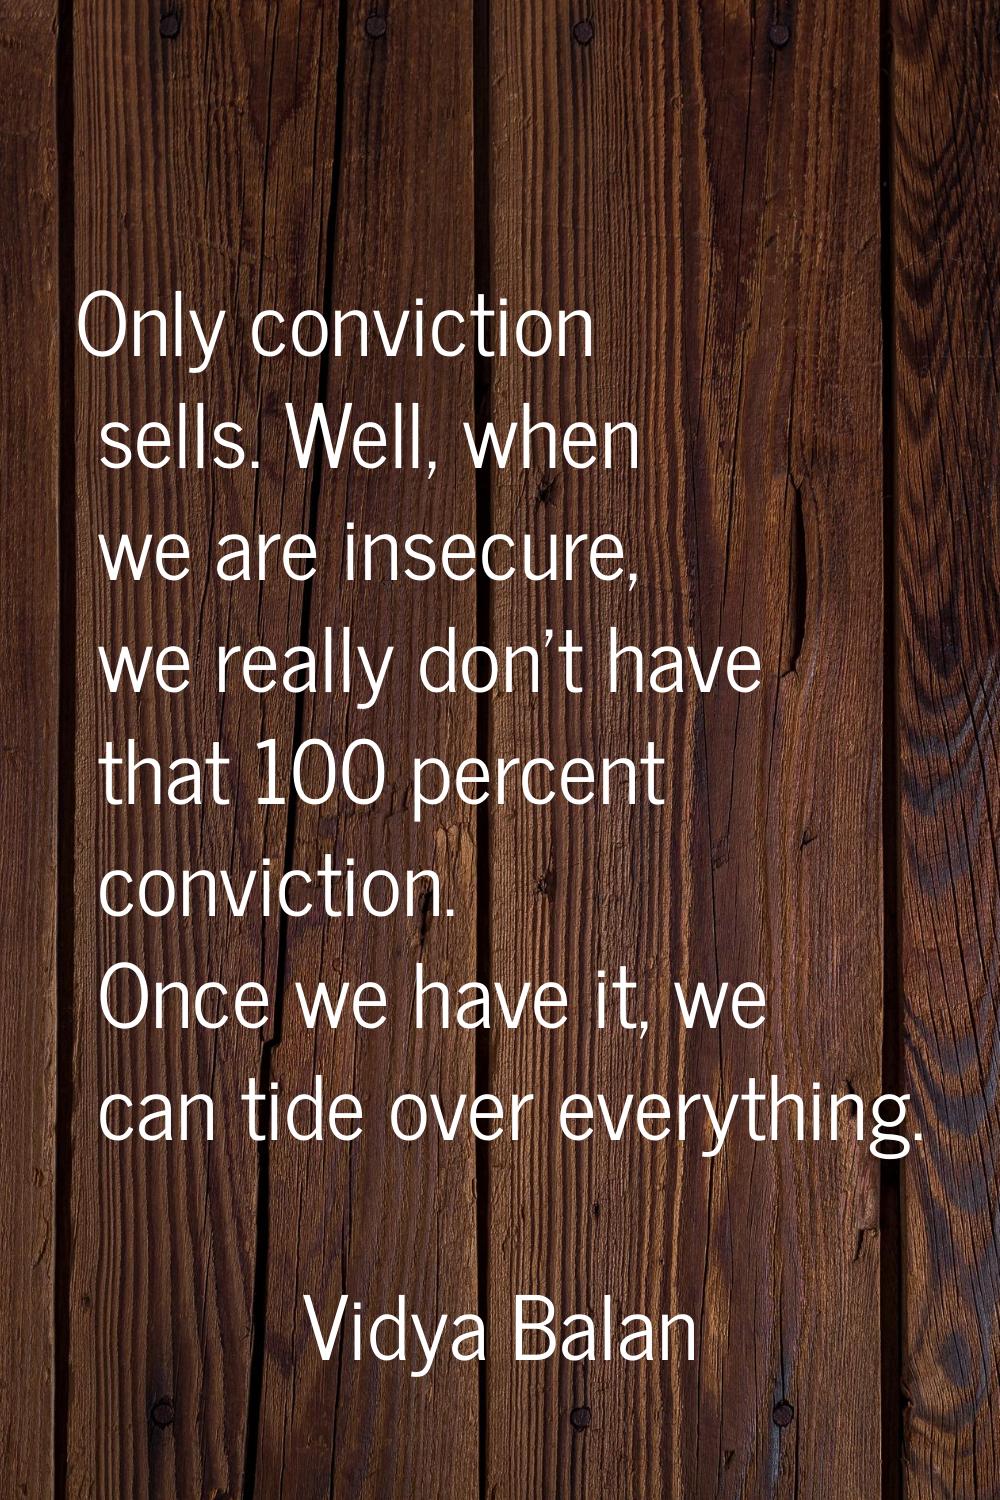 Only conviction sells. Well, when we are insecure, we really don't have that 100 percent conviction